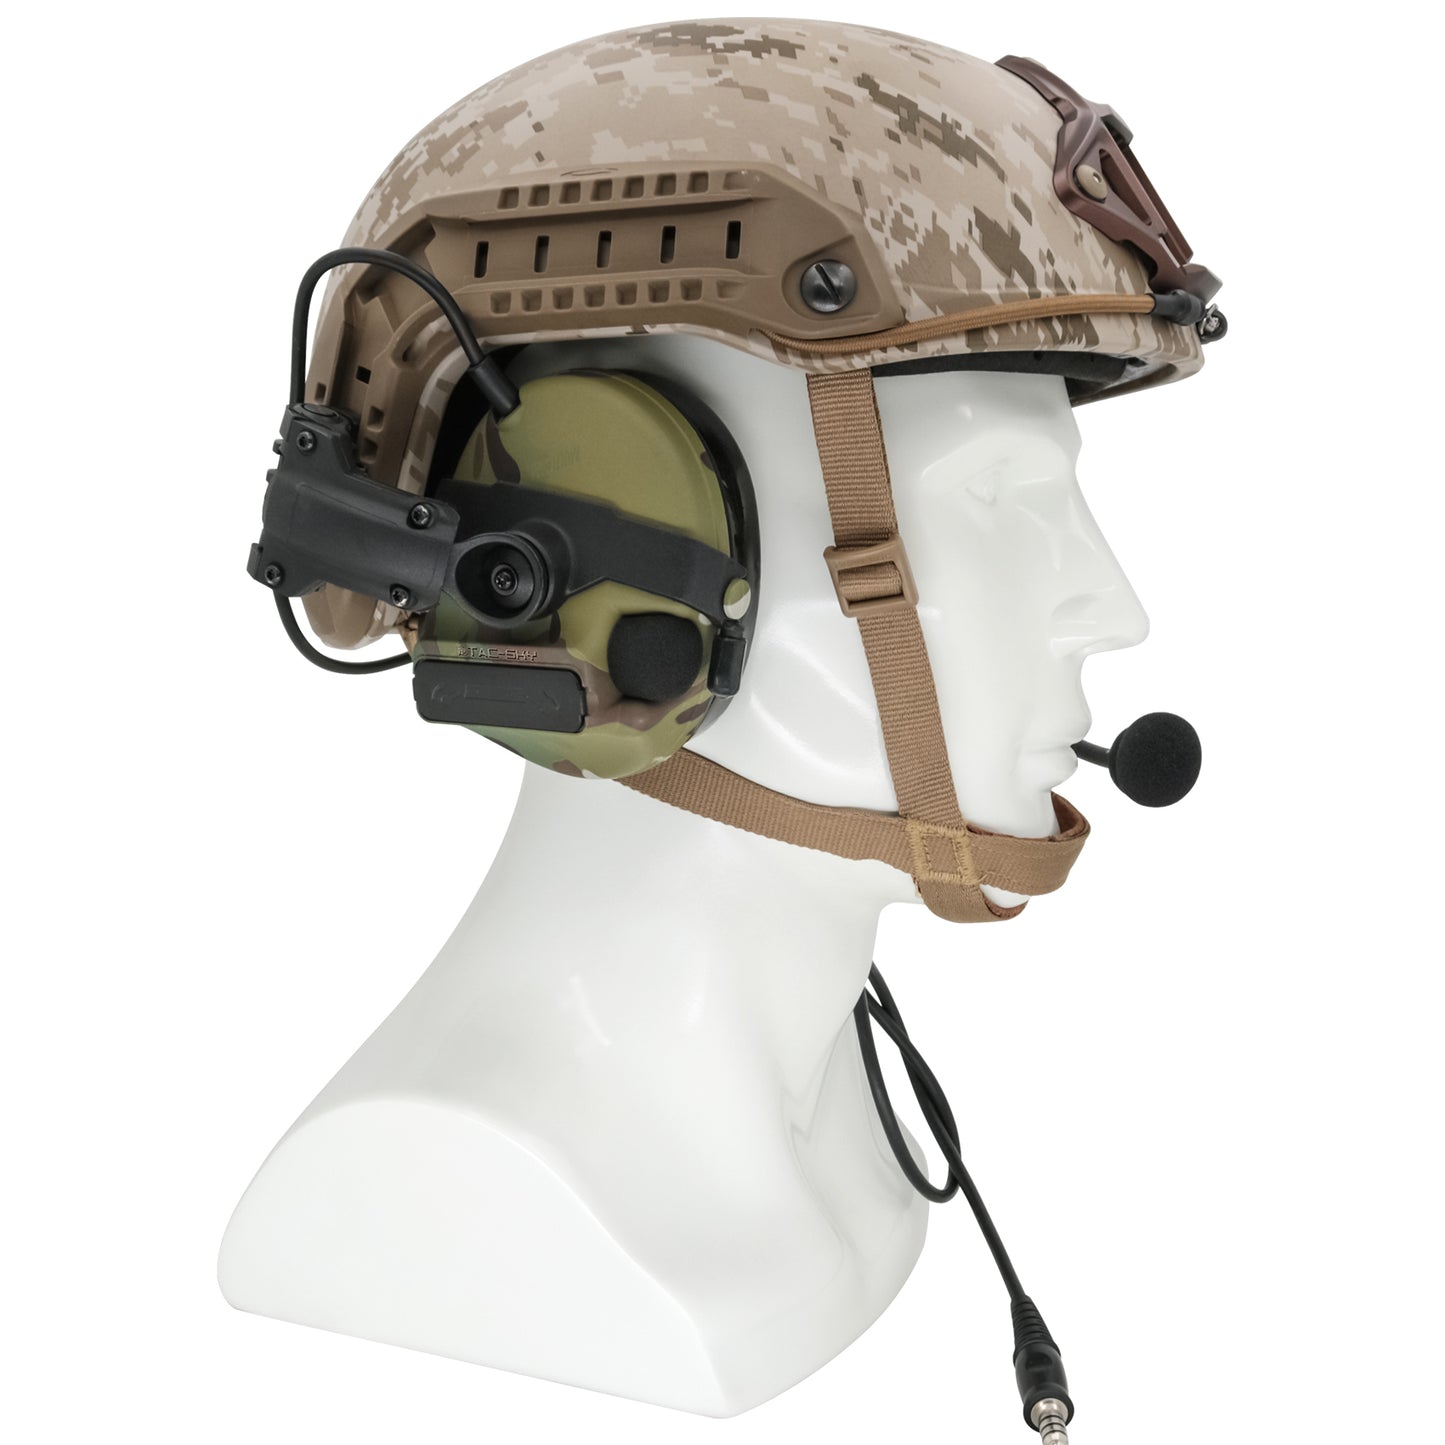 TAC-SKY C3 Tactical Headset Helmet Rail Adapter Version Noise Cancelling Headphones With U94 PTT Airsoft Hunting